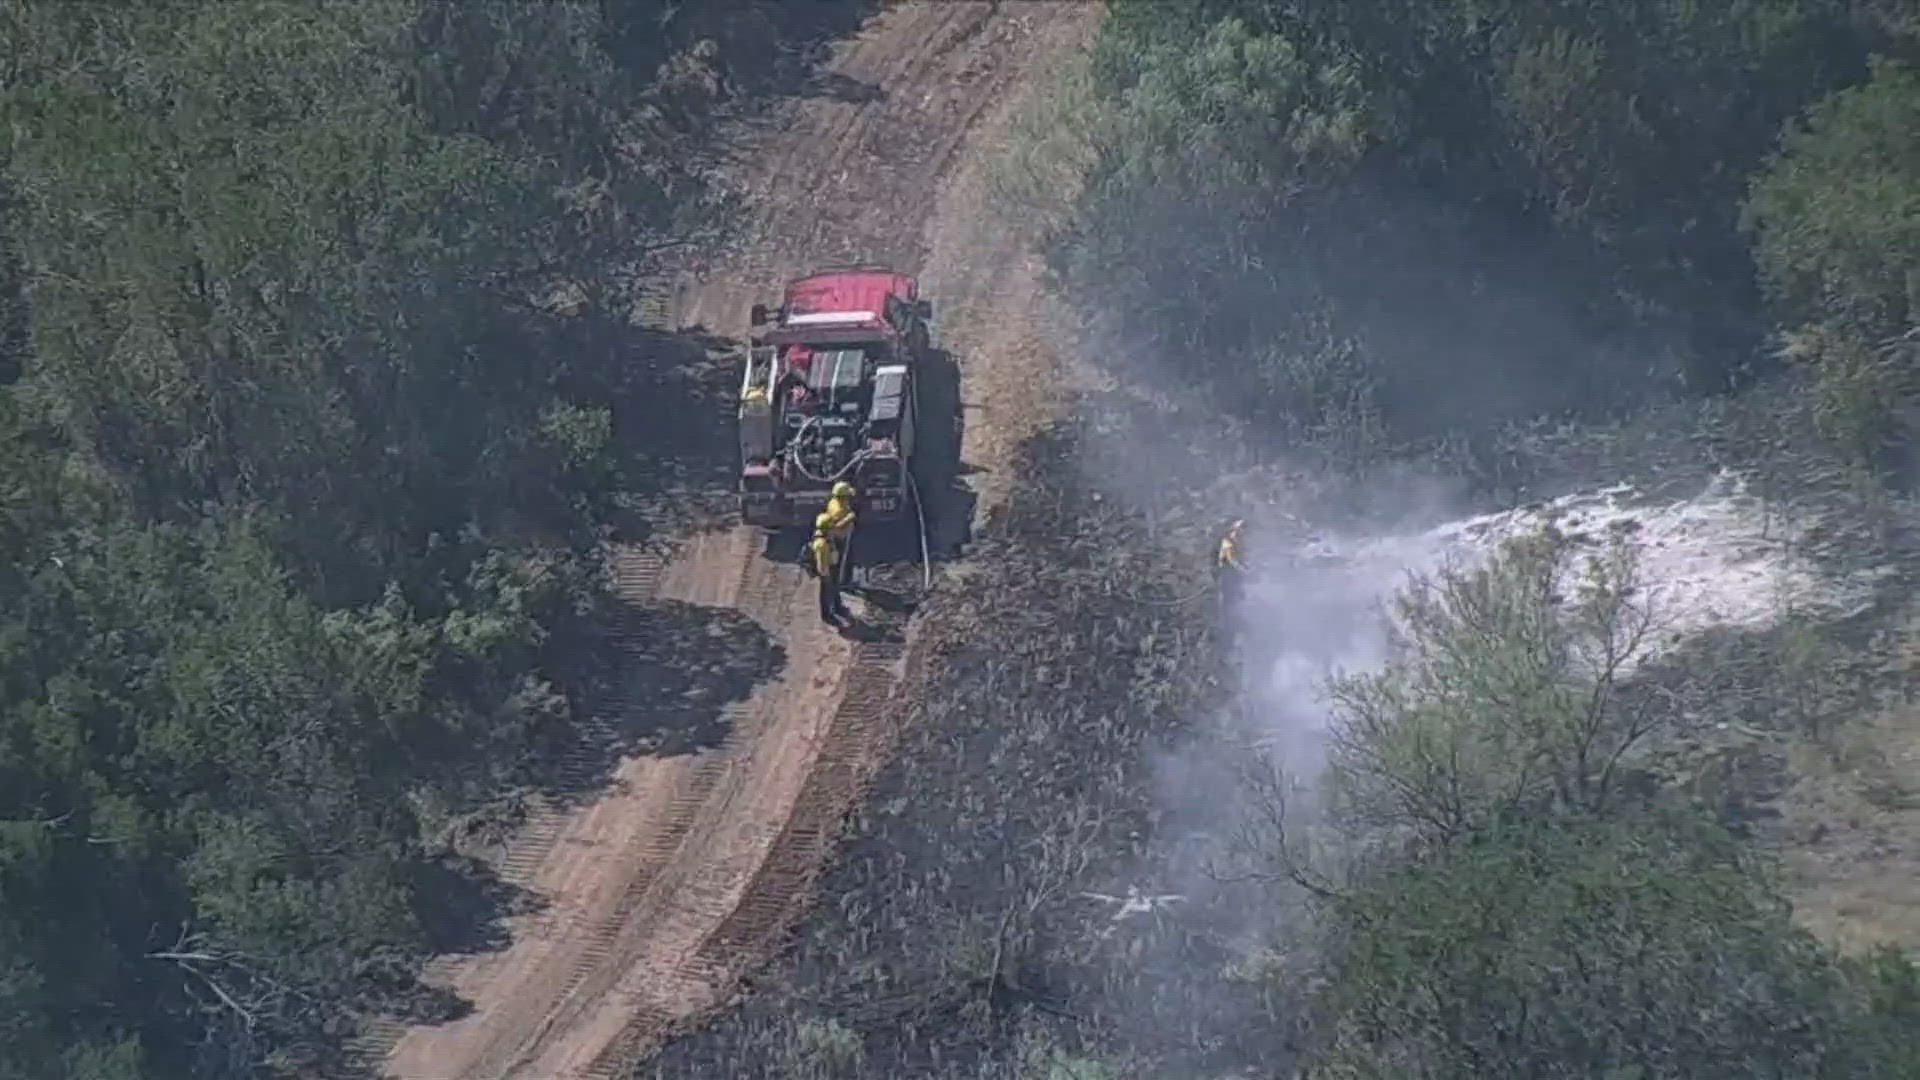 As of July 4, the fire was 100% contained according to Texas A&M Forest Services. Officials said on July 7 the fire rekindled and broke containment lines.